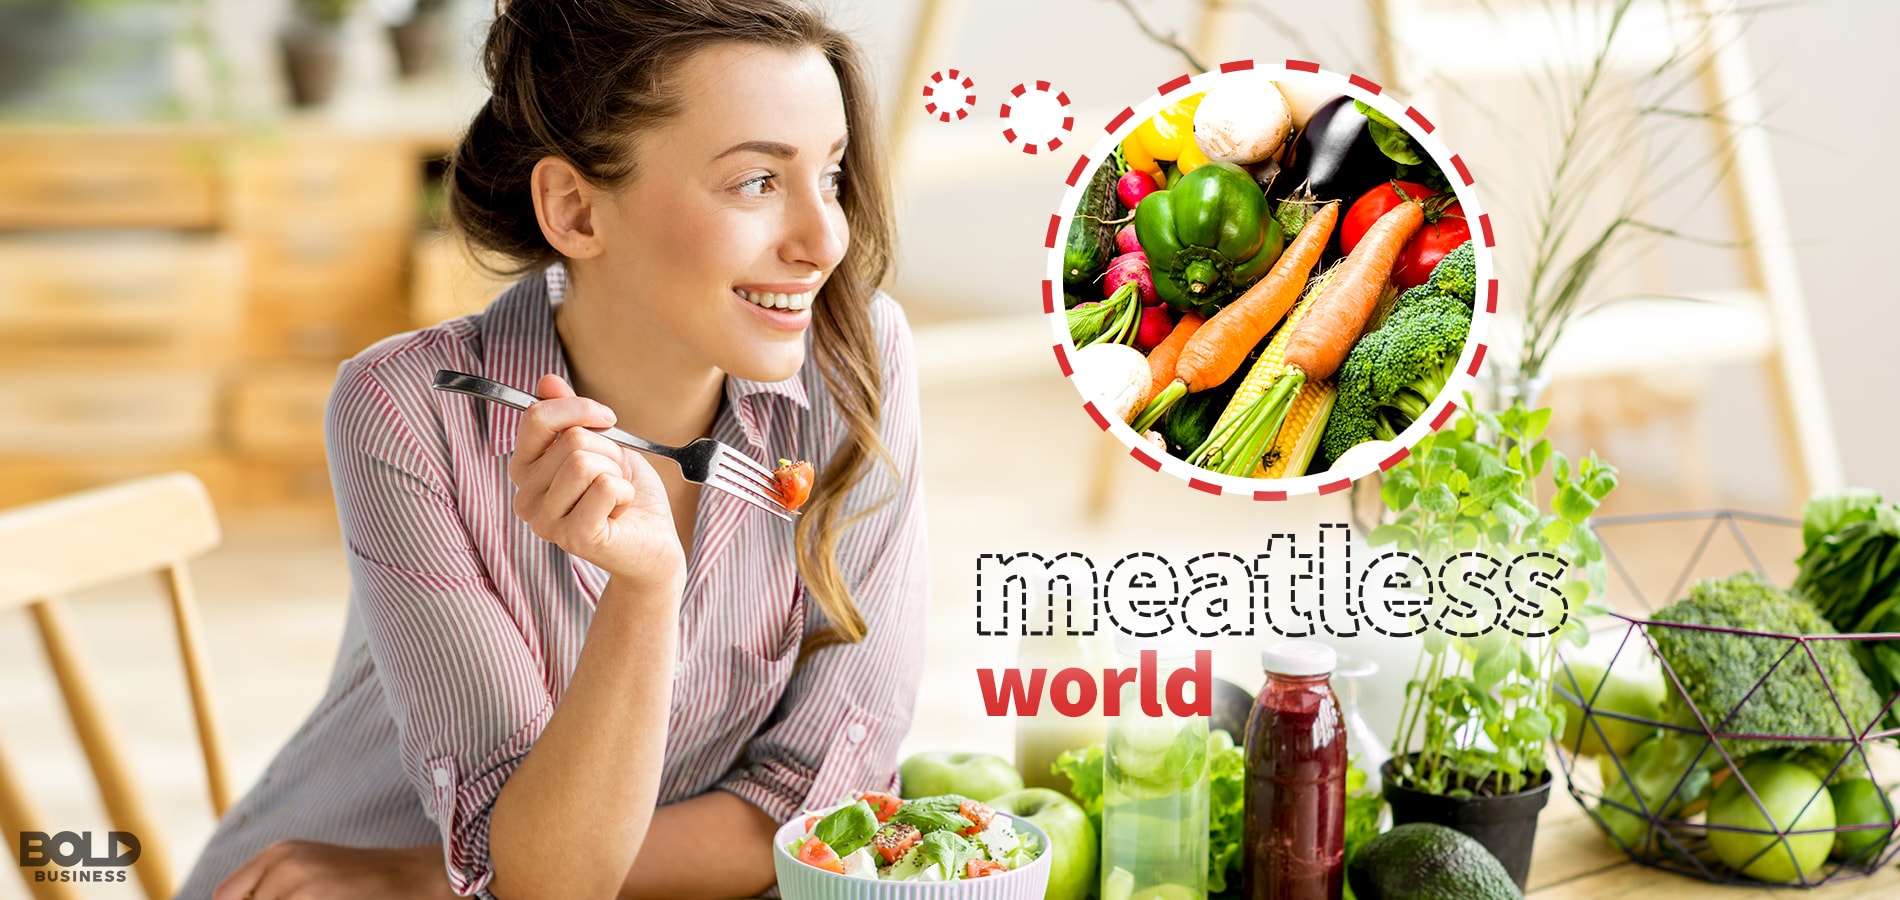 Meat Substitutes: Disruption and Threats to $90B Industry